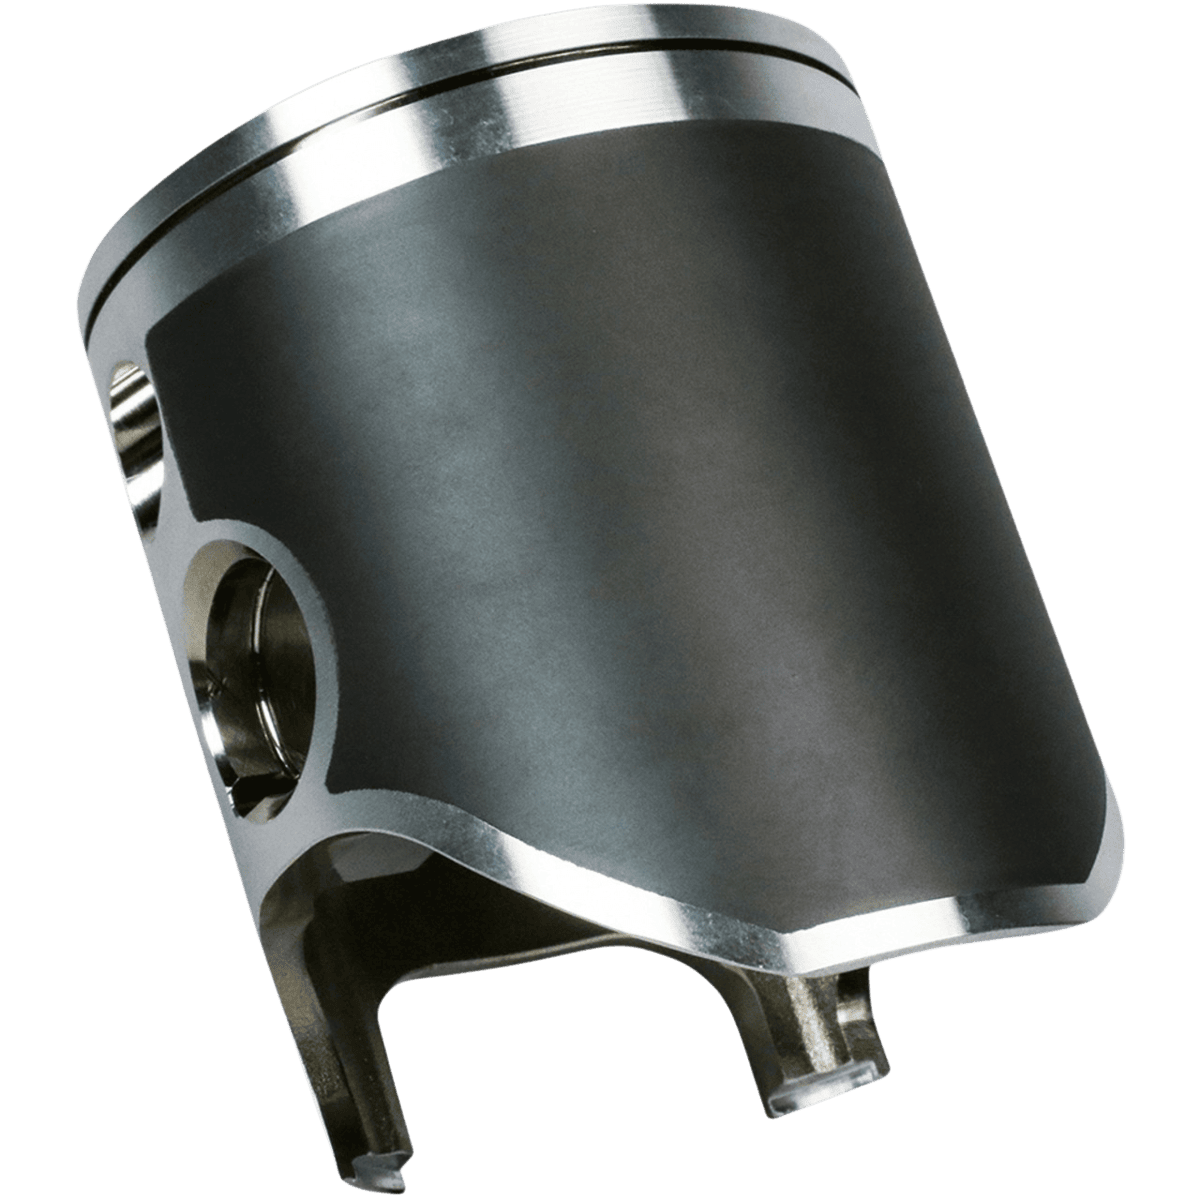 Best 2012 WR250 Piston Kit for Two strokes